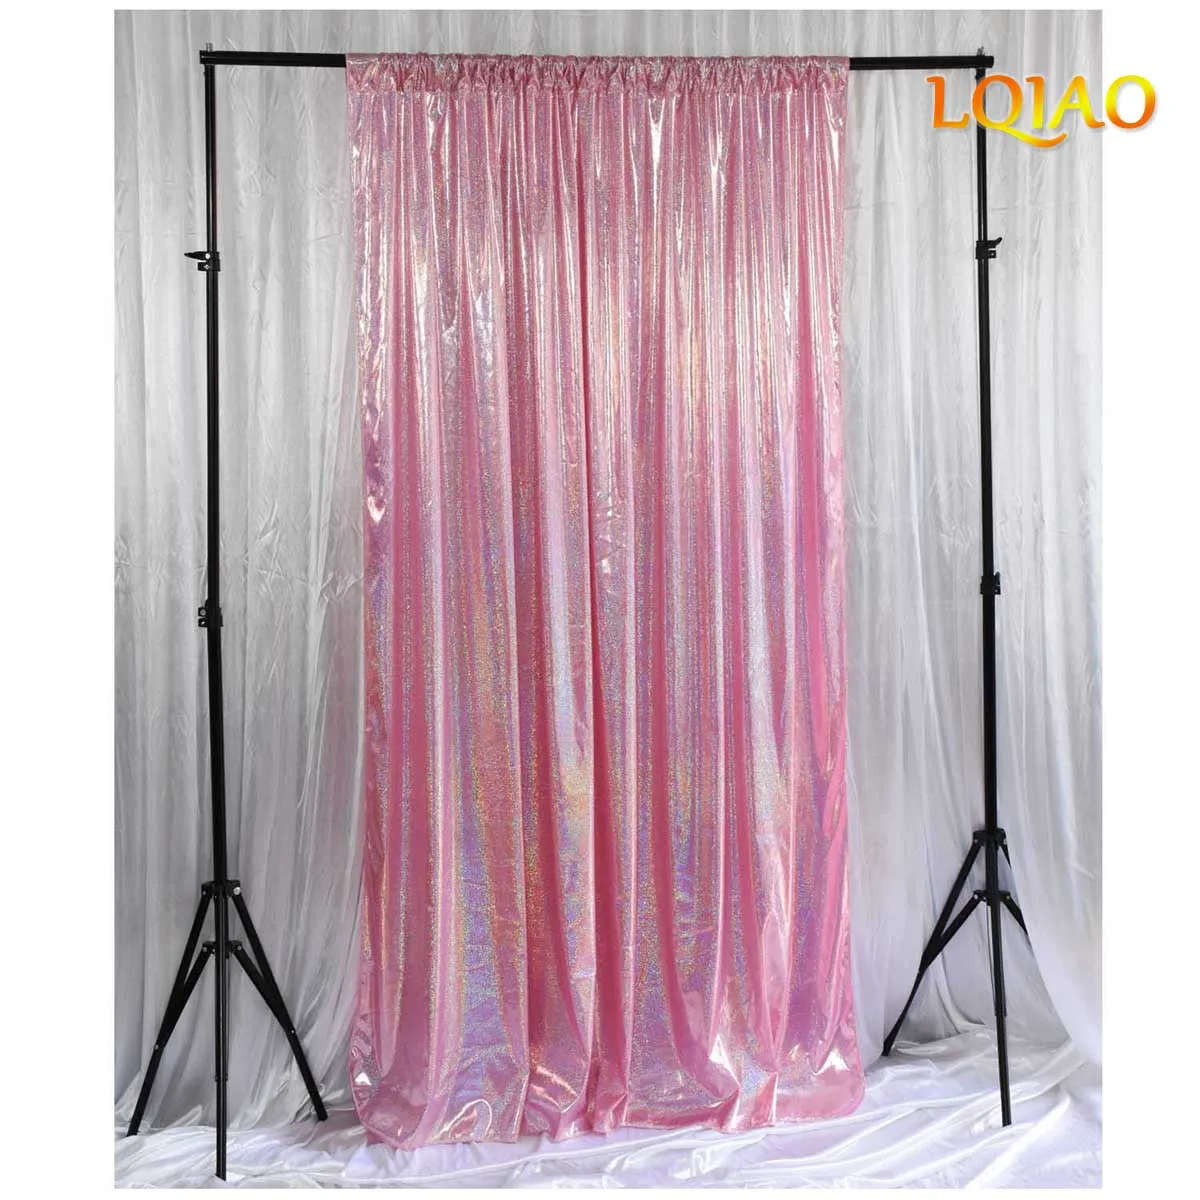 Large sequins FREE SHIPPING Pink Sparkle Irridescent Sequin Photography PhotoBooth Backdrop